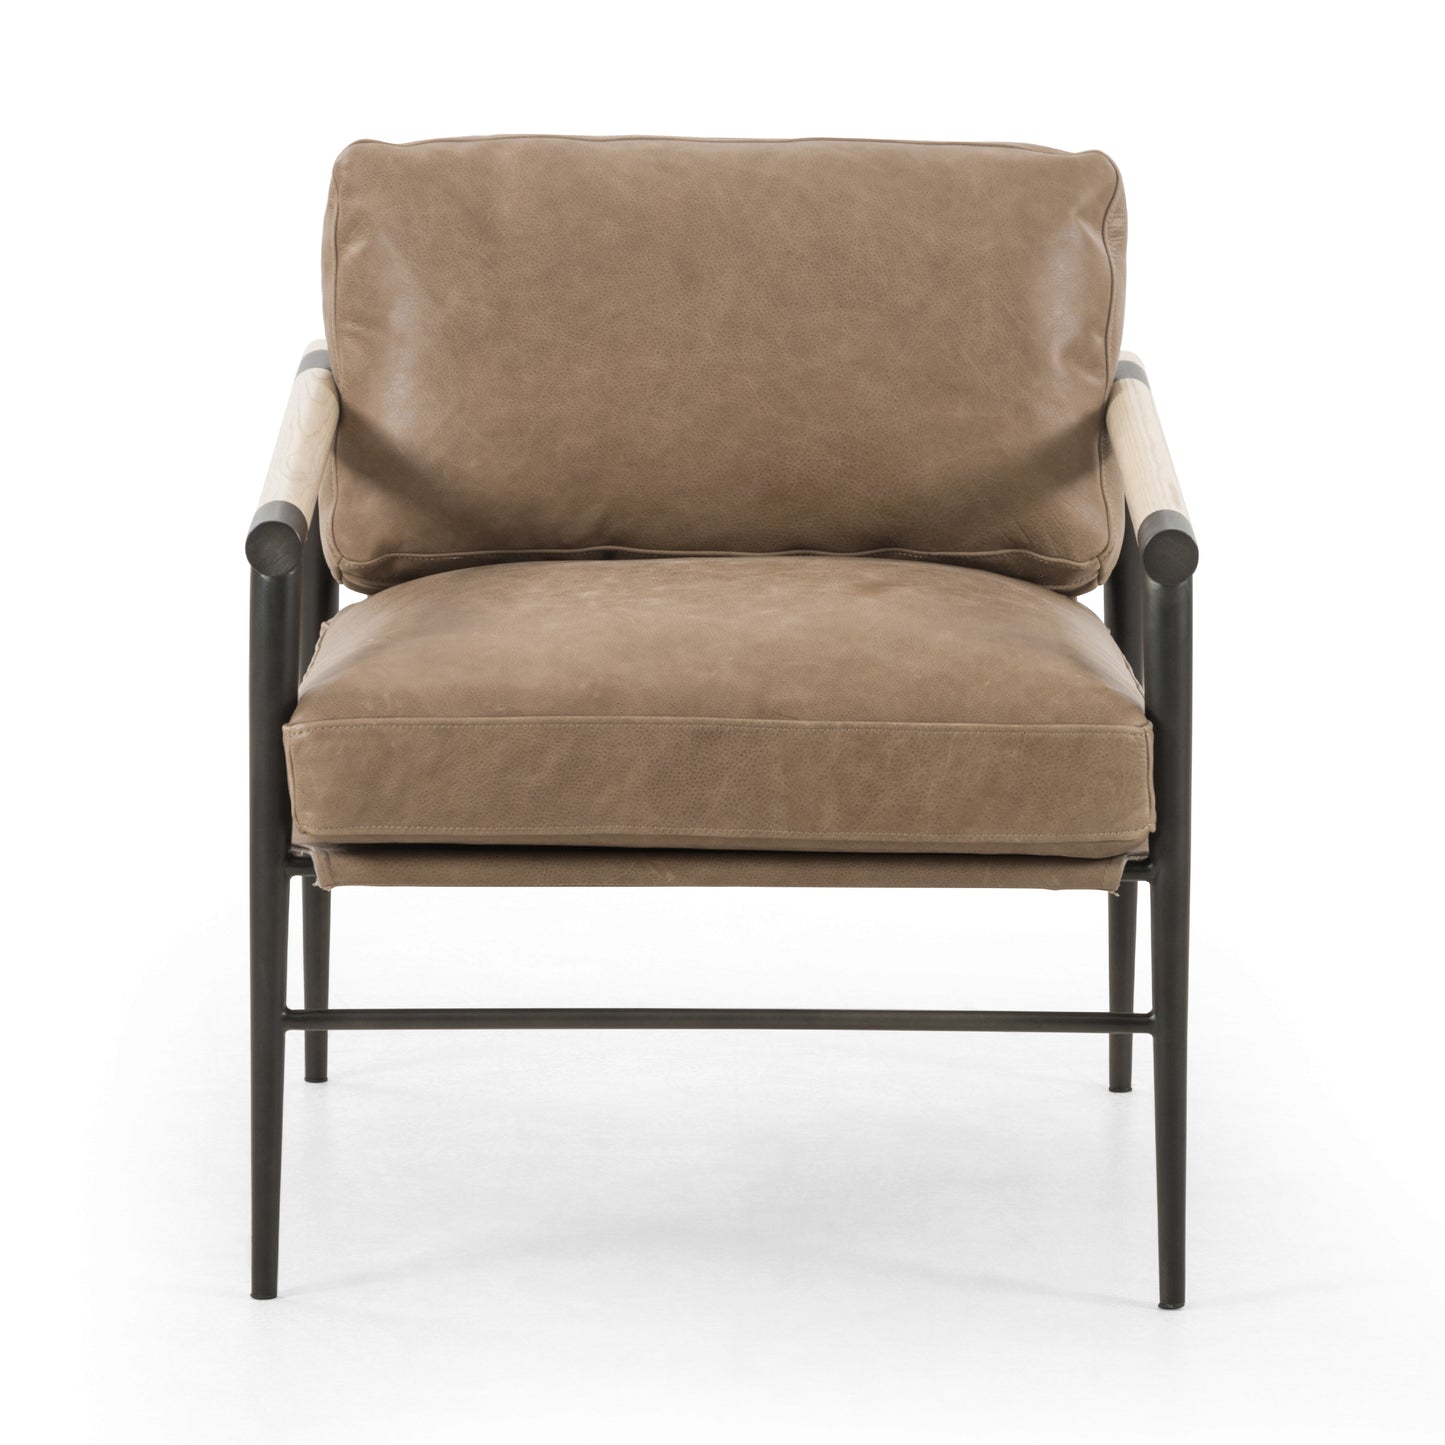  frfour hands rowen chair palermo front